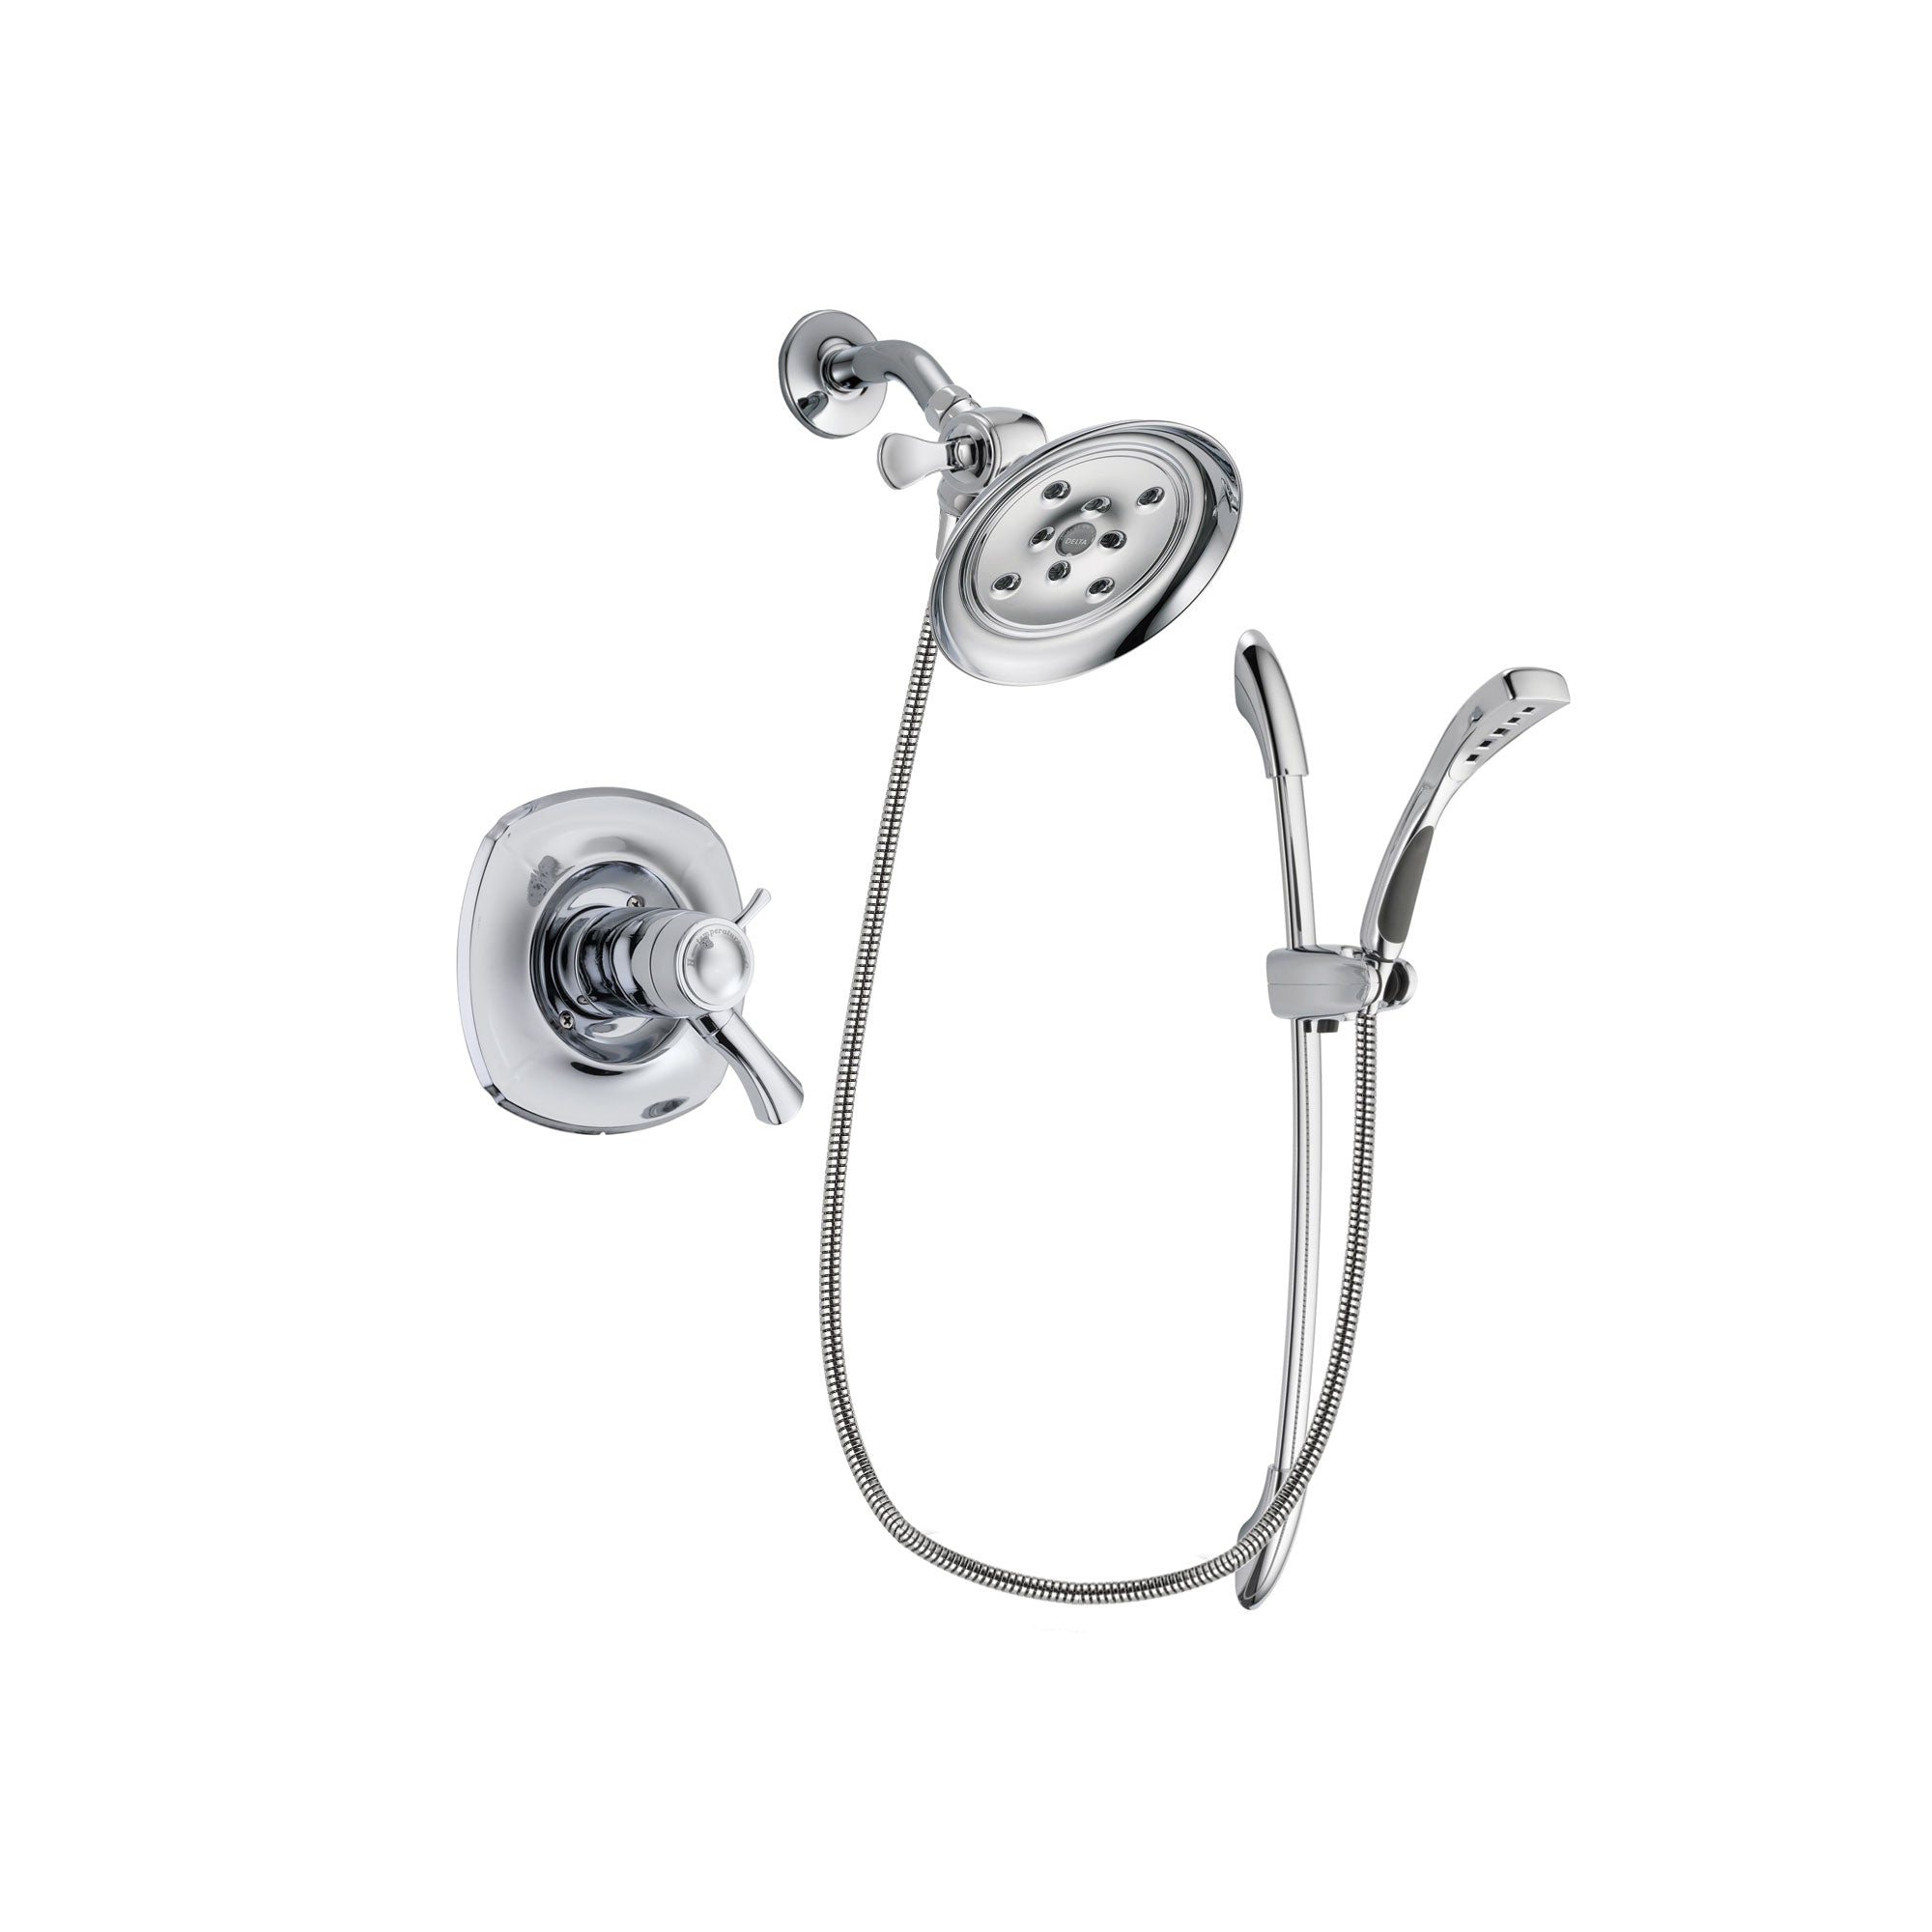 Delta Addison Chrome Finish Thermostatic Shower Faucet System Package with Large Rain Showerhead and Handheld Shower with Slide Bar Includes Rough-in Valve DSP0500V